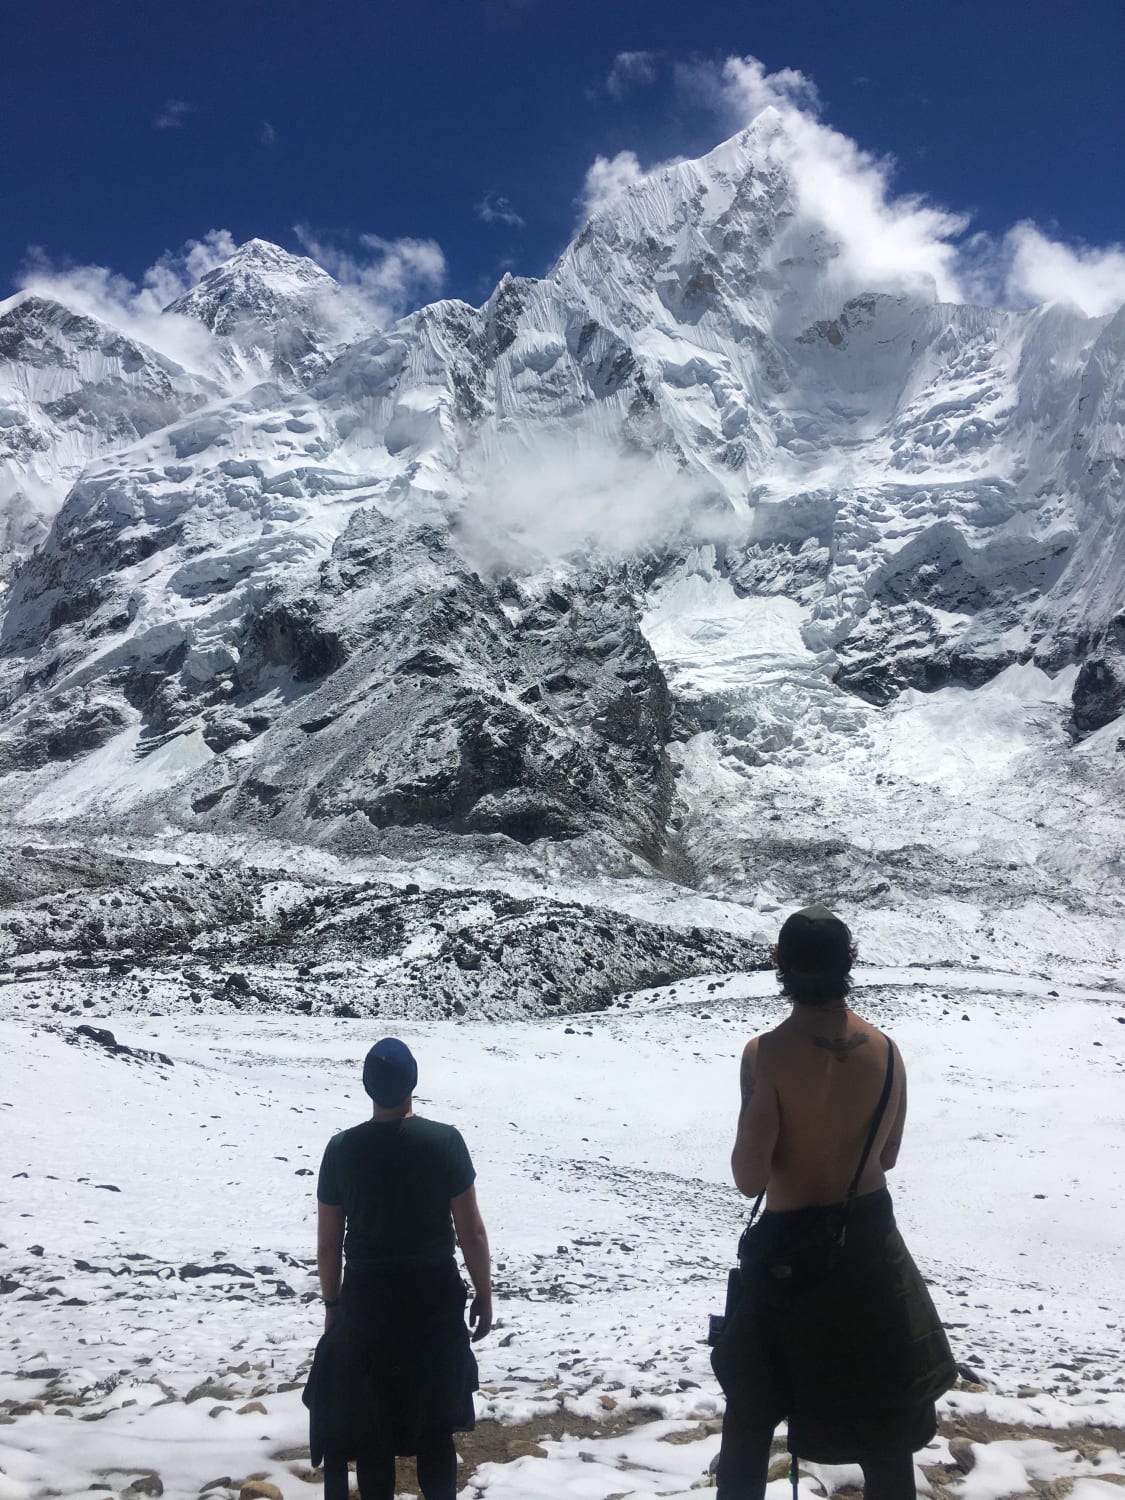 Backpacking to the Himalayas- Overlooking the Mount Everest.